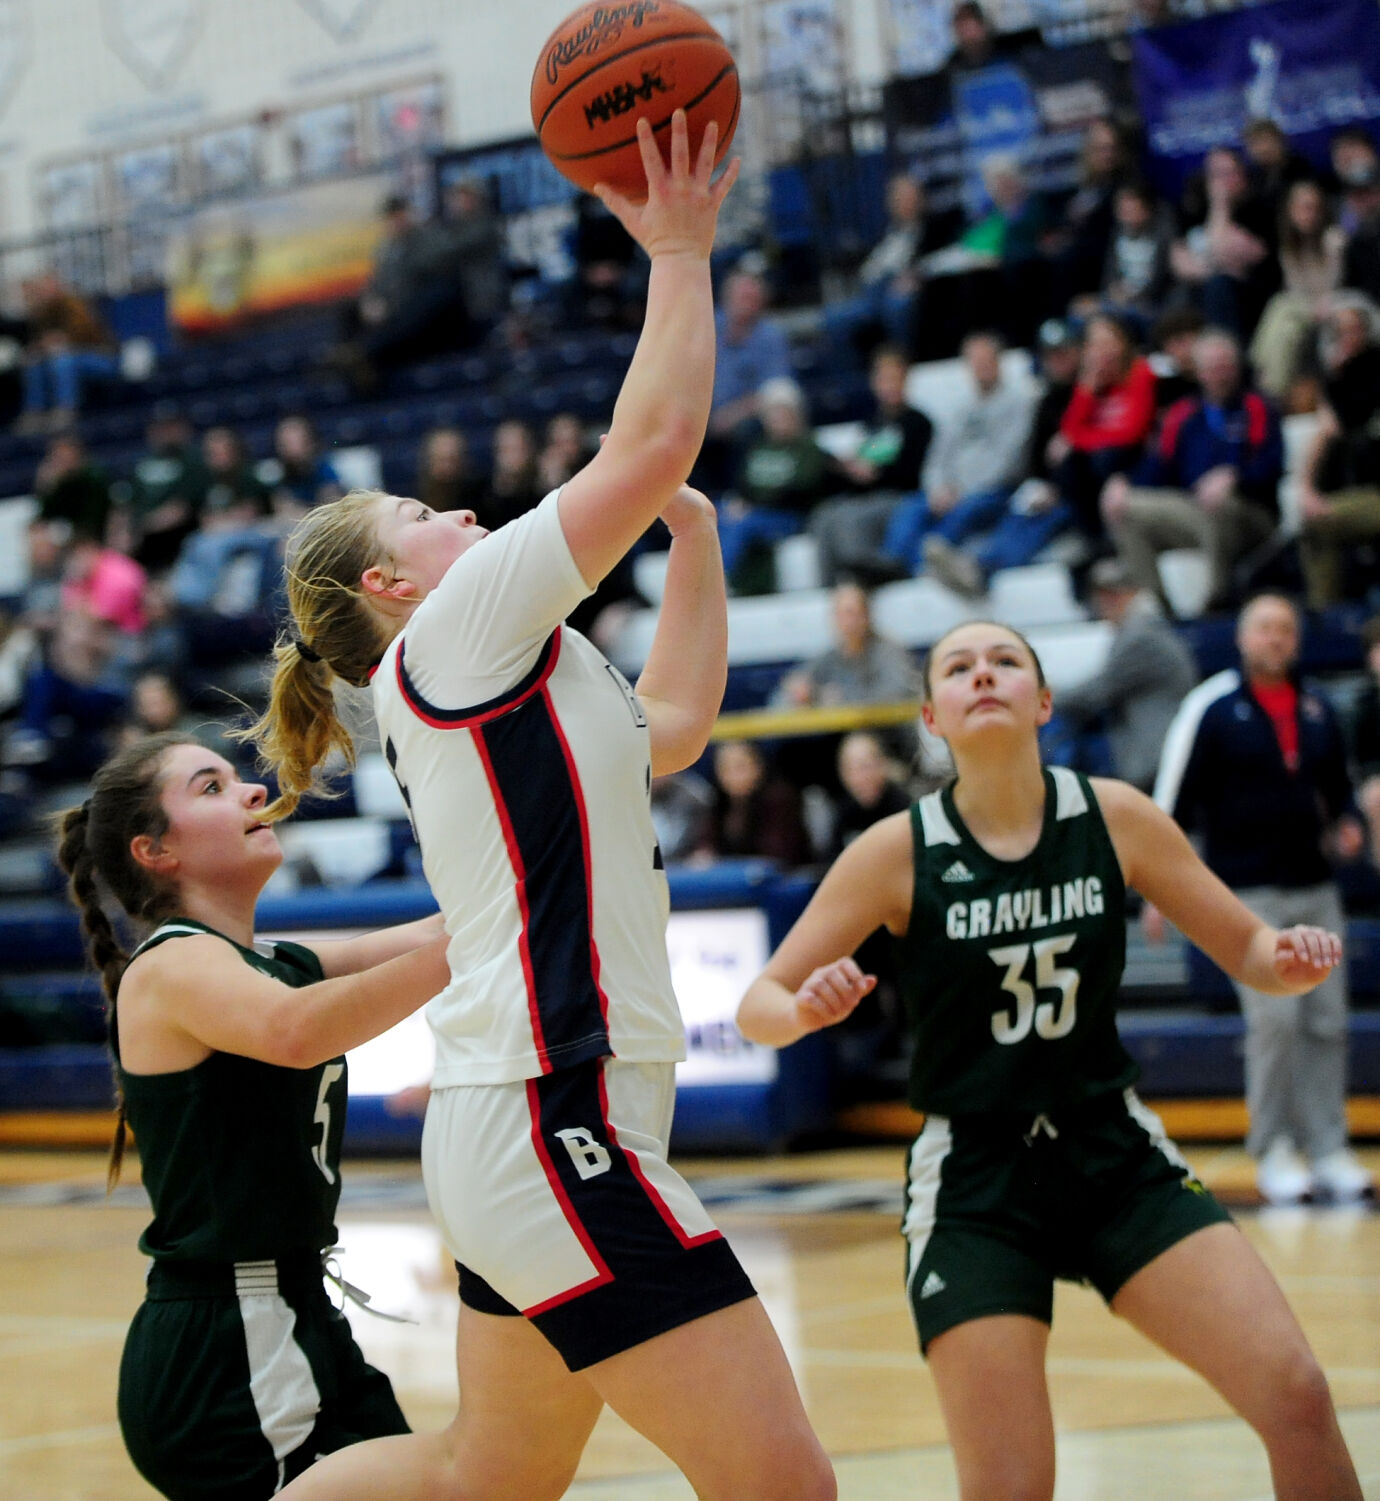 High School Basketball Roundup: Boyne City’s Braydin Noble Sets the Tone in District Semifinals; TC West, Buckley, and Cadillac Advance